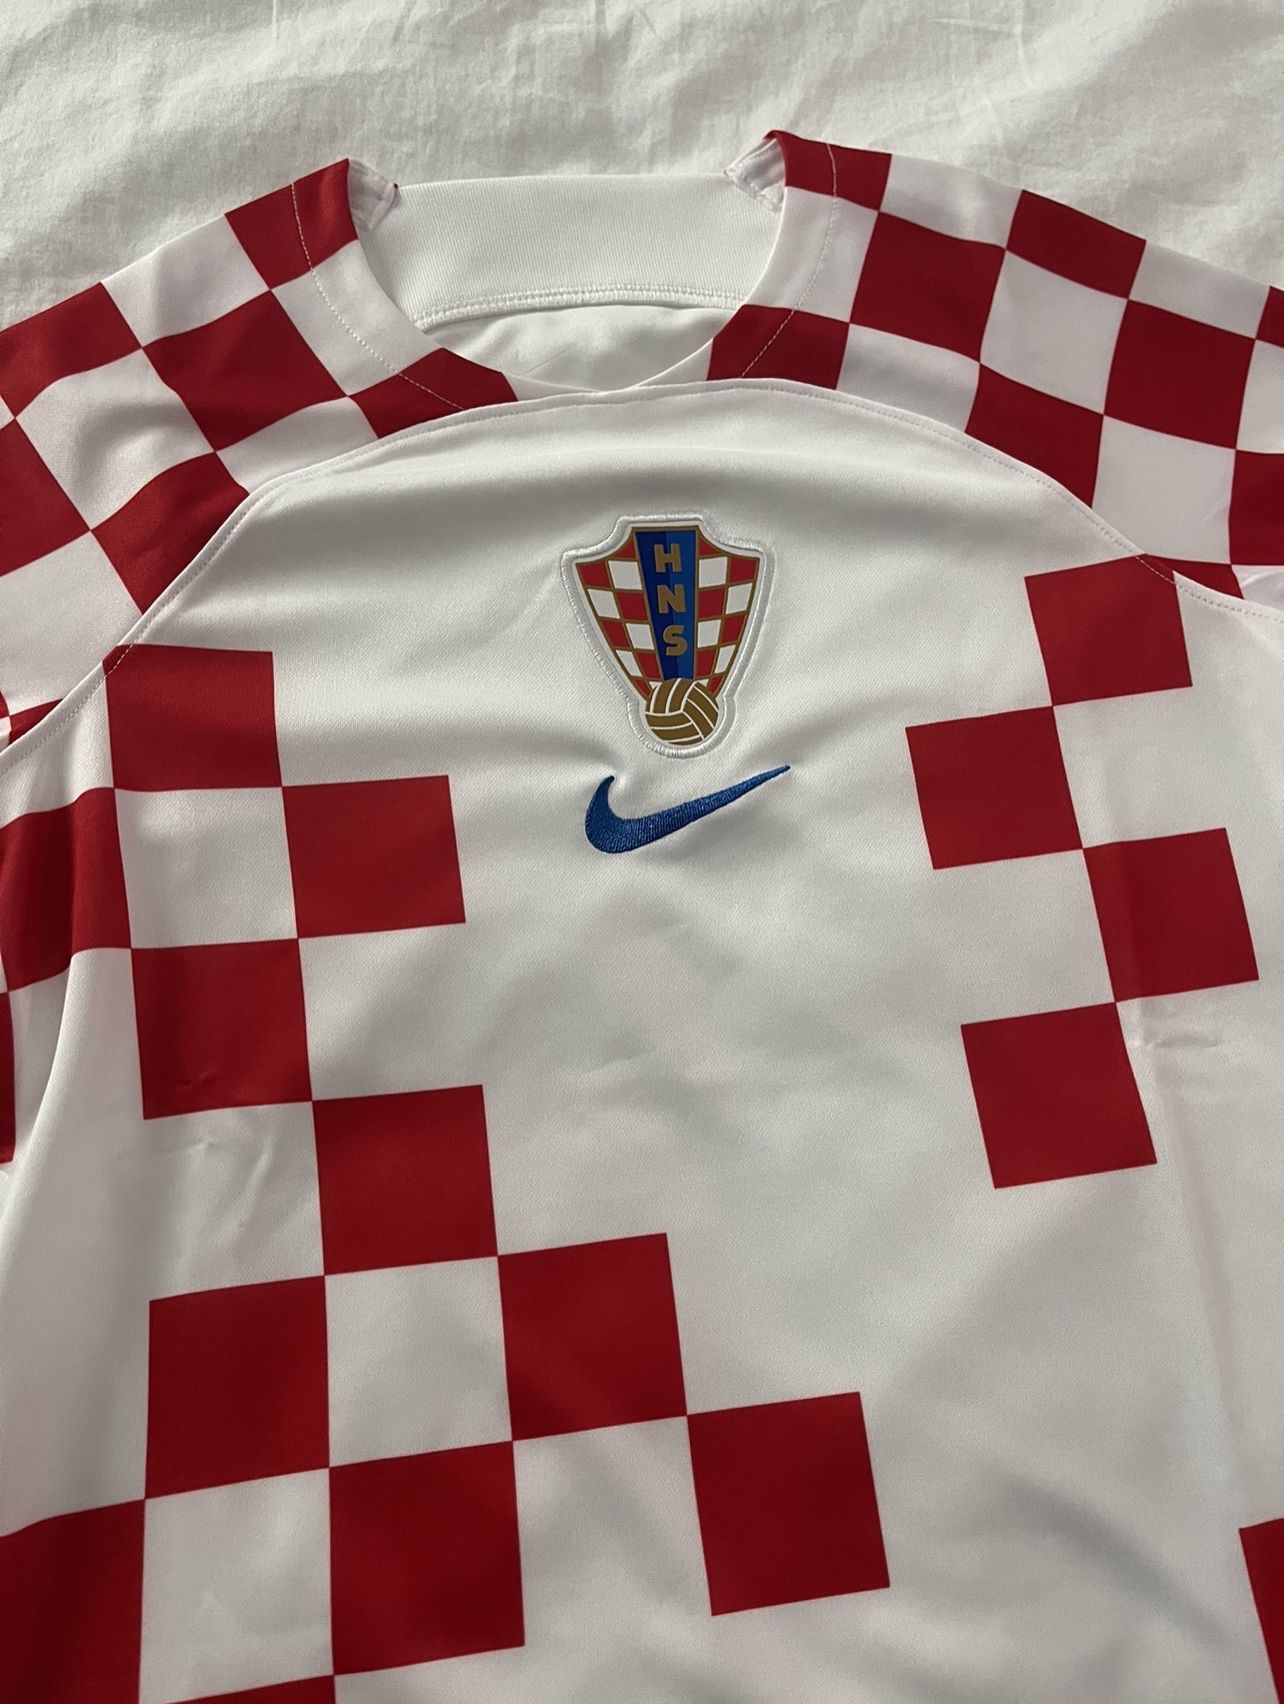 Croatia National Team Youth Home Jersey - White  Size Youth M